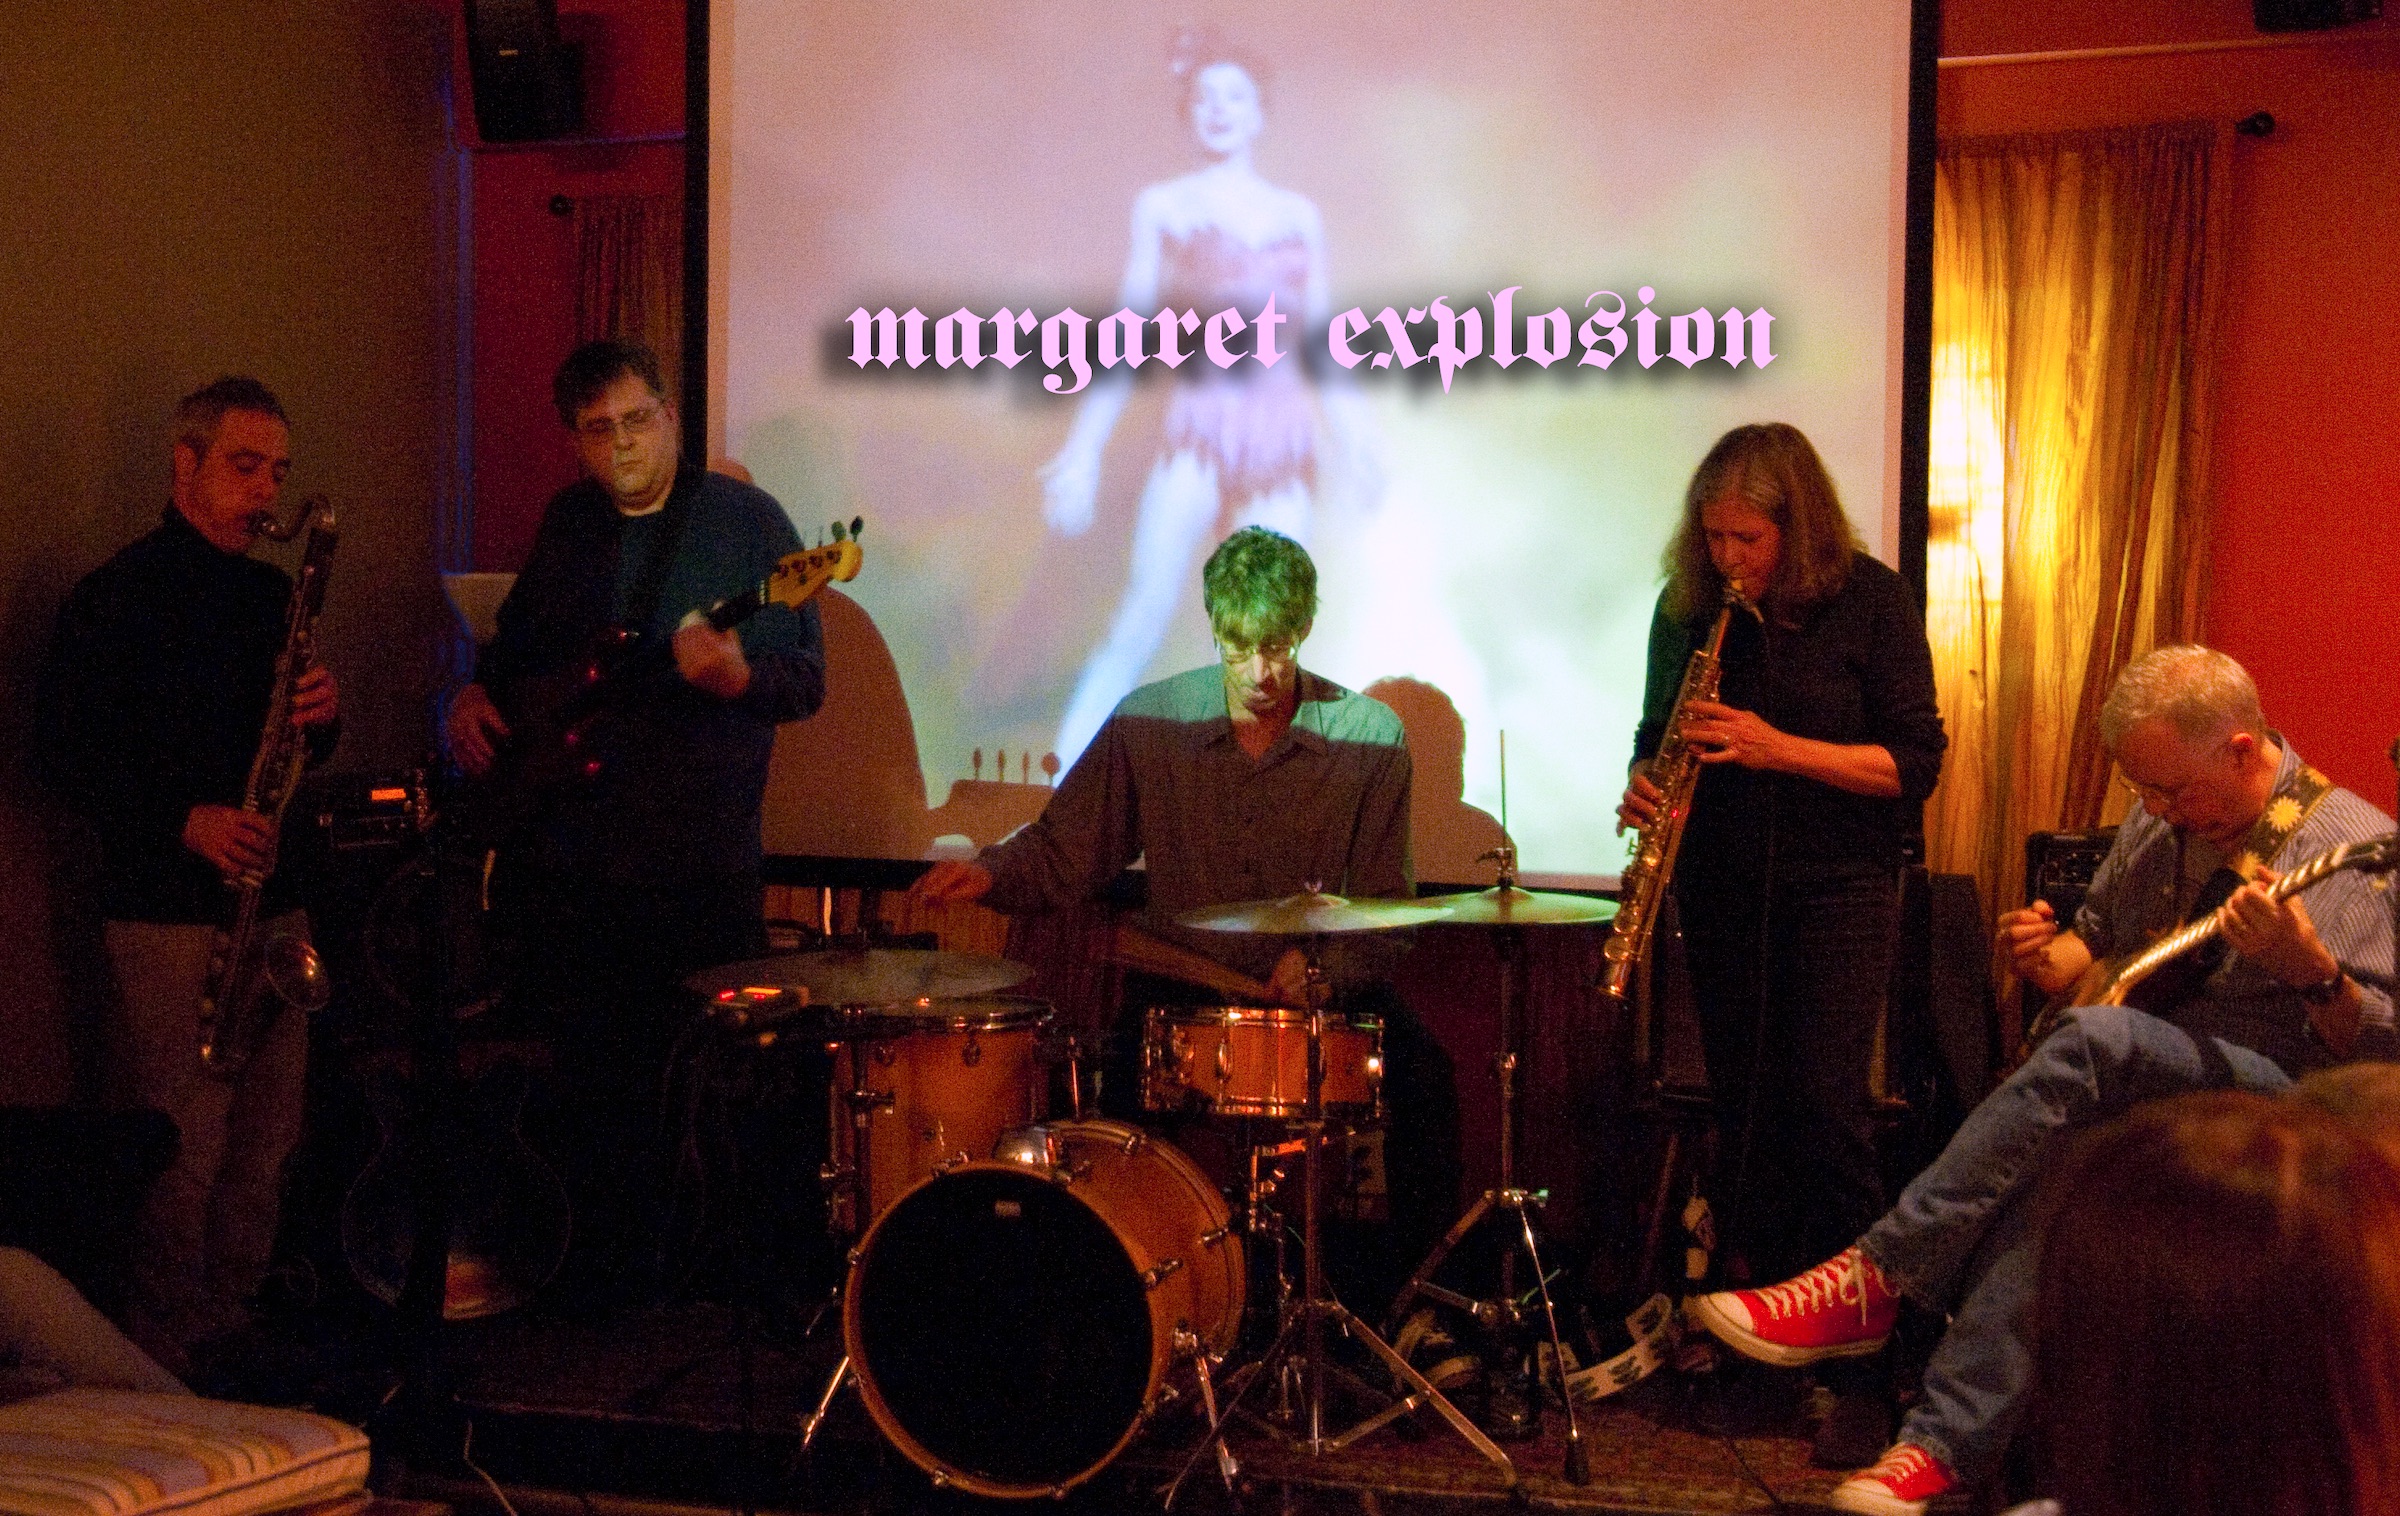 Margaret Explosion playing upstairs at Abilene with Jack Schaefer on bass clarinet. Photo by Brian Peterson.